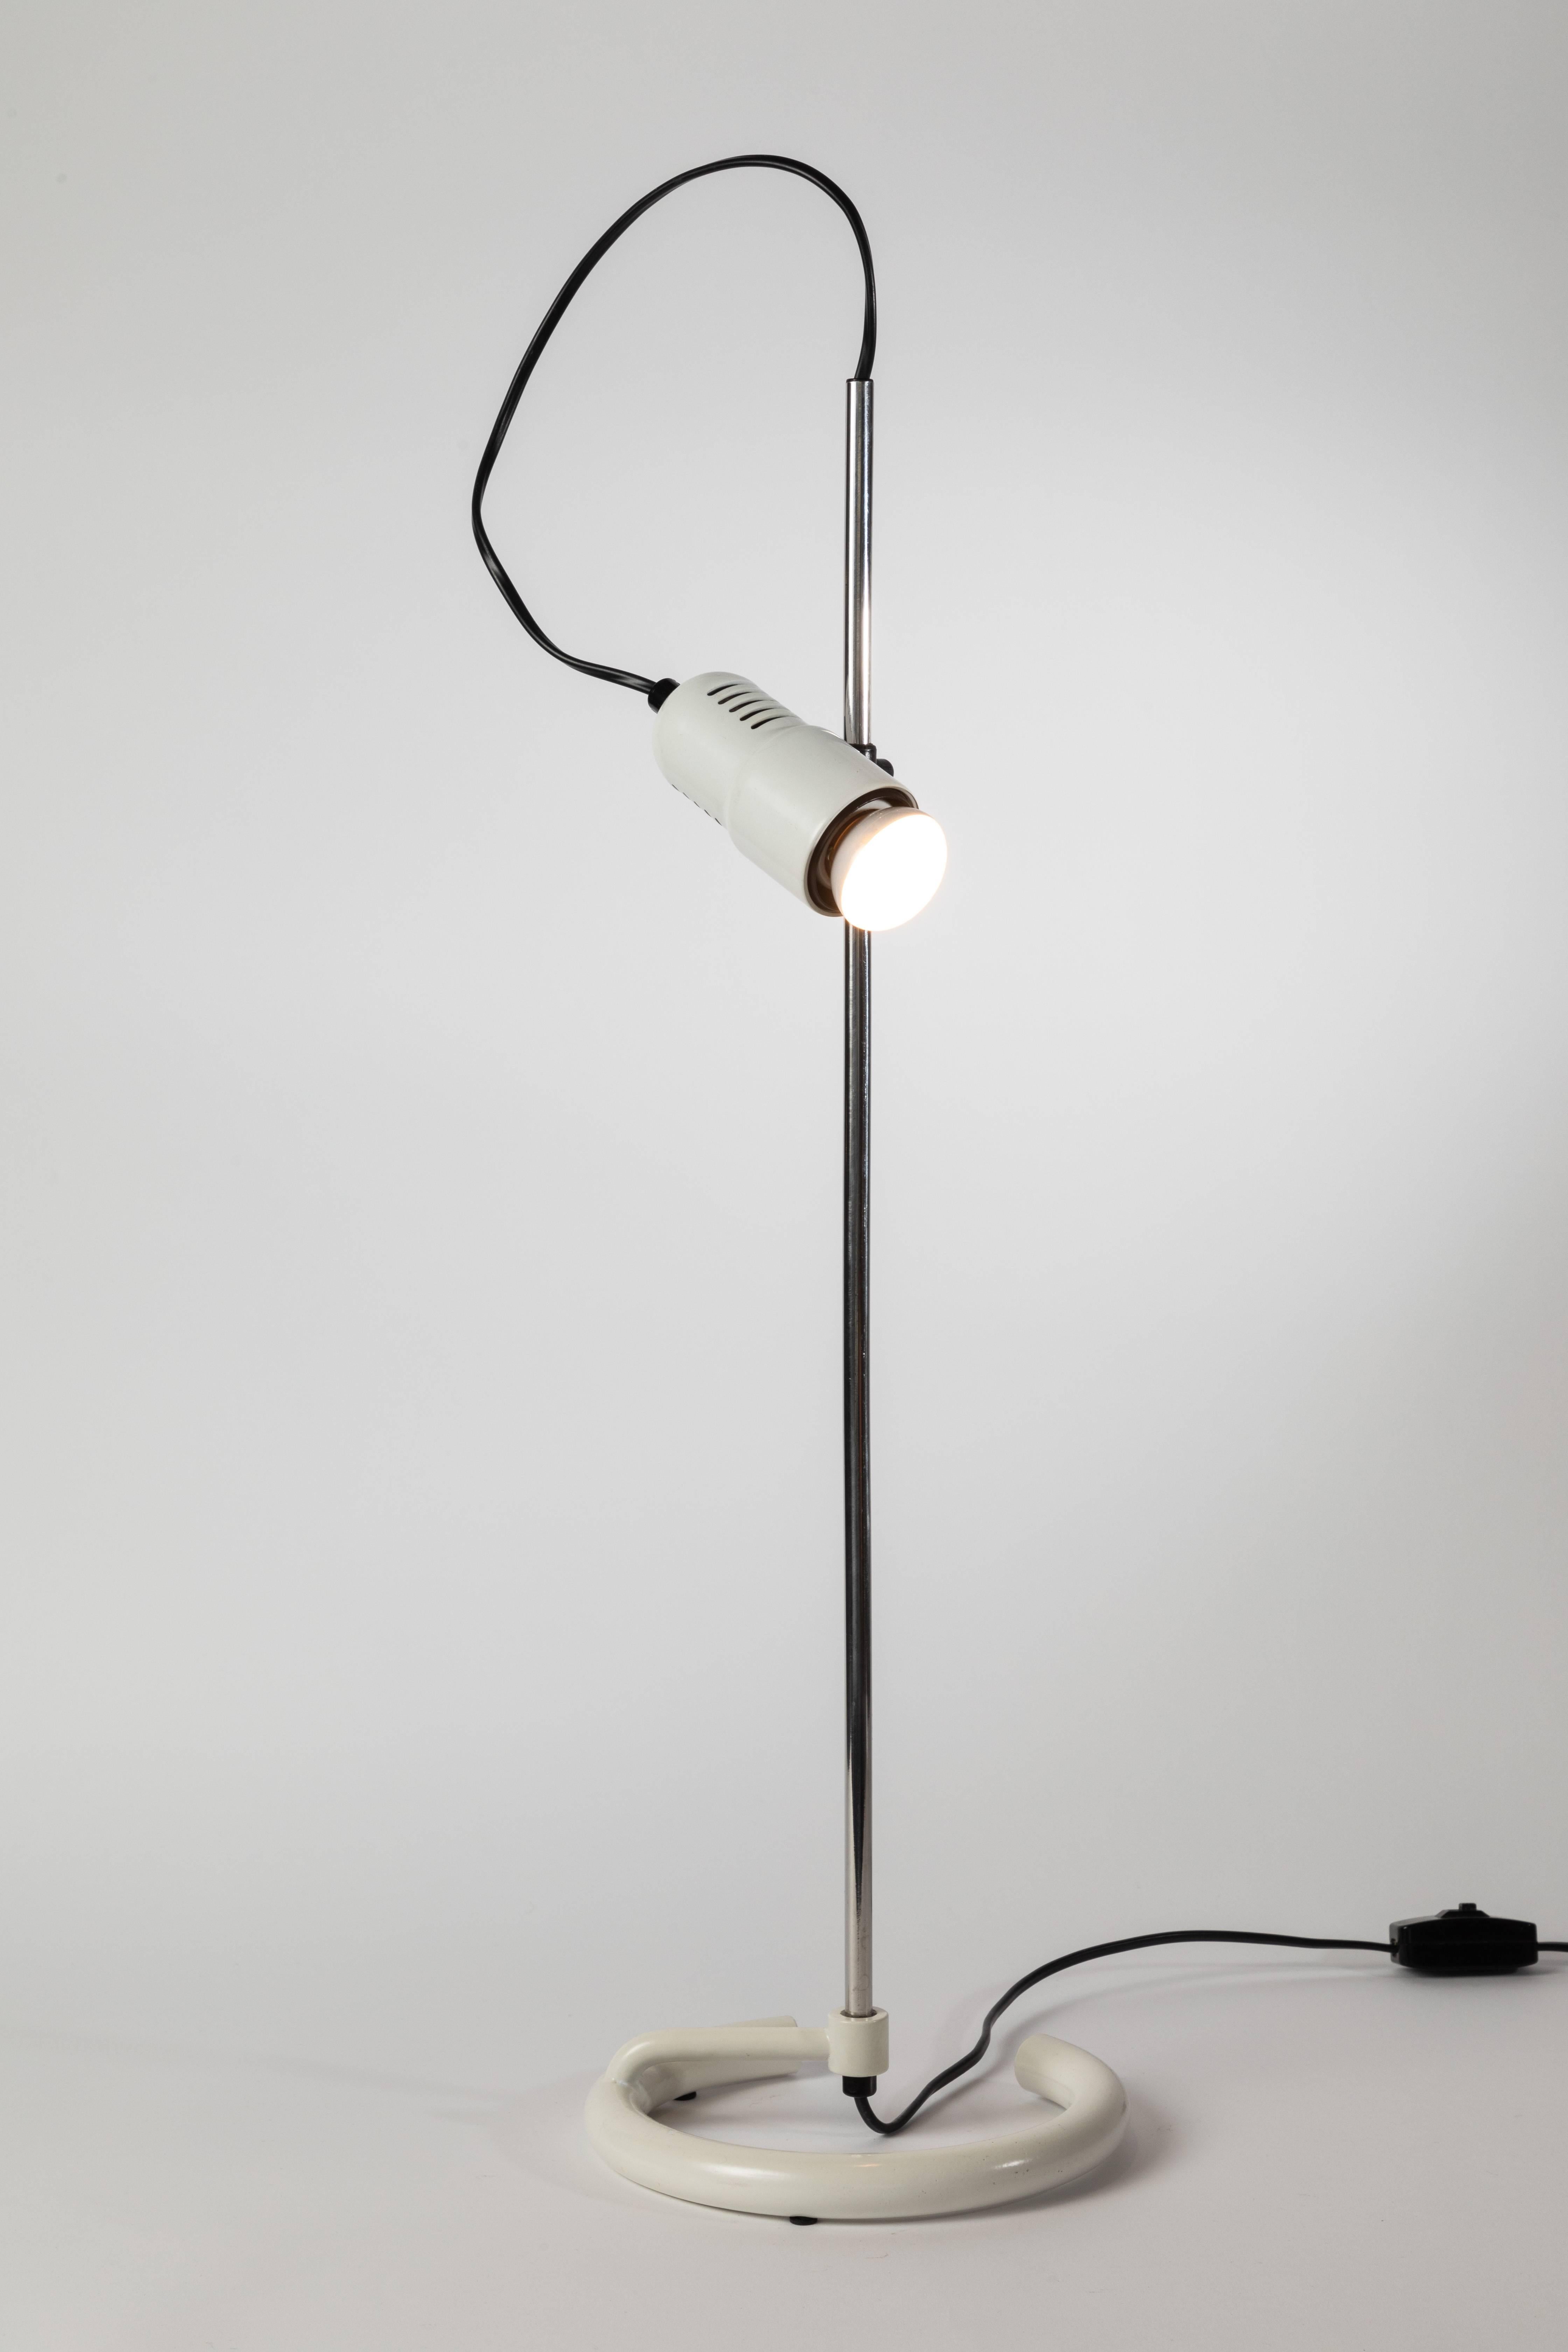 1960s Elio Martinelli table lamp for Martinelli Luce. A quintessentially 1960s Italian Minimalist design executed in chrome and white enameled metal in the manner of the iconic lighting of Joe Colombo for O-Luce. Light can adjust up/down and rotate